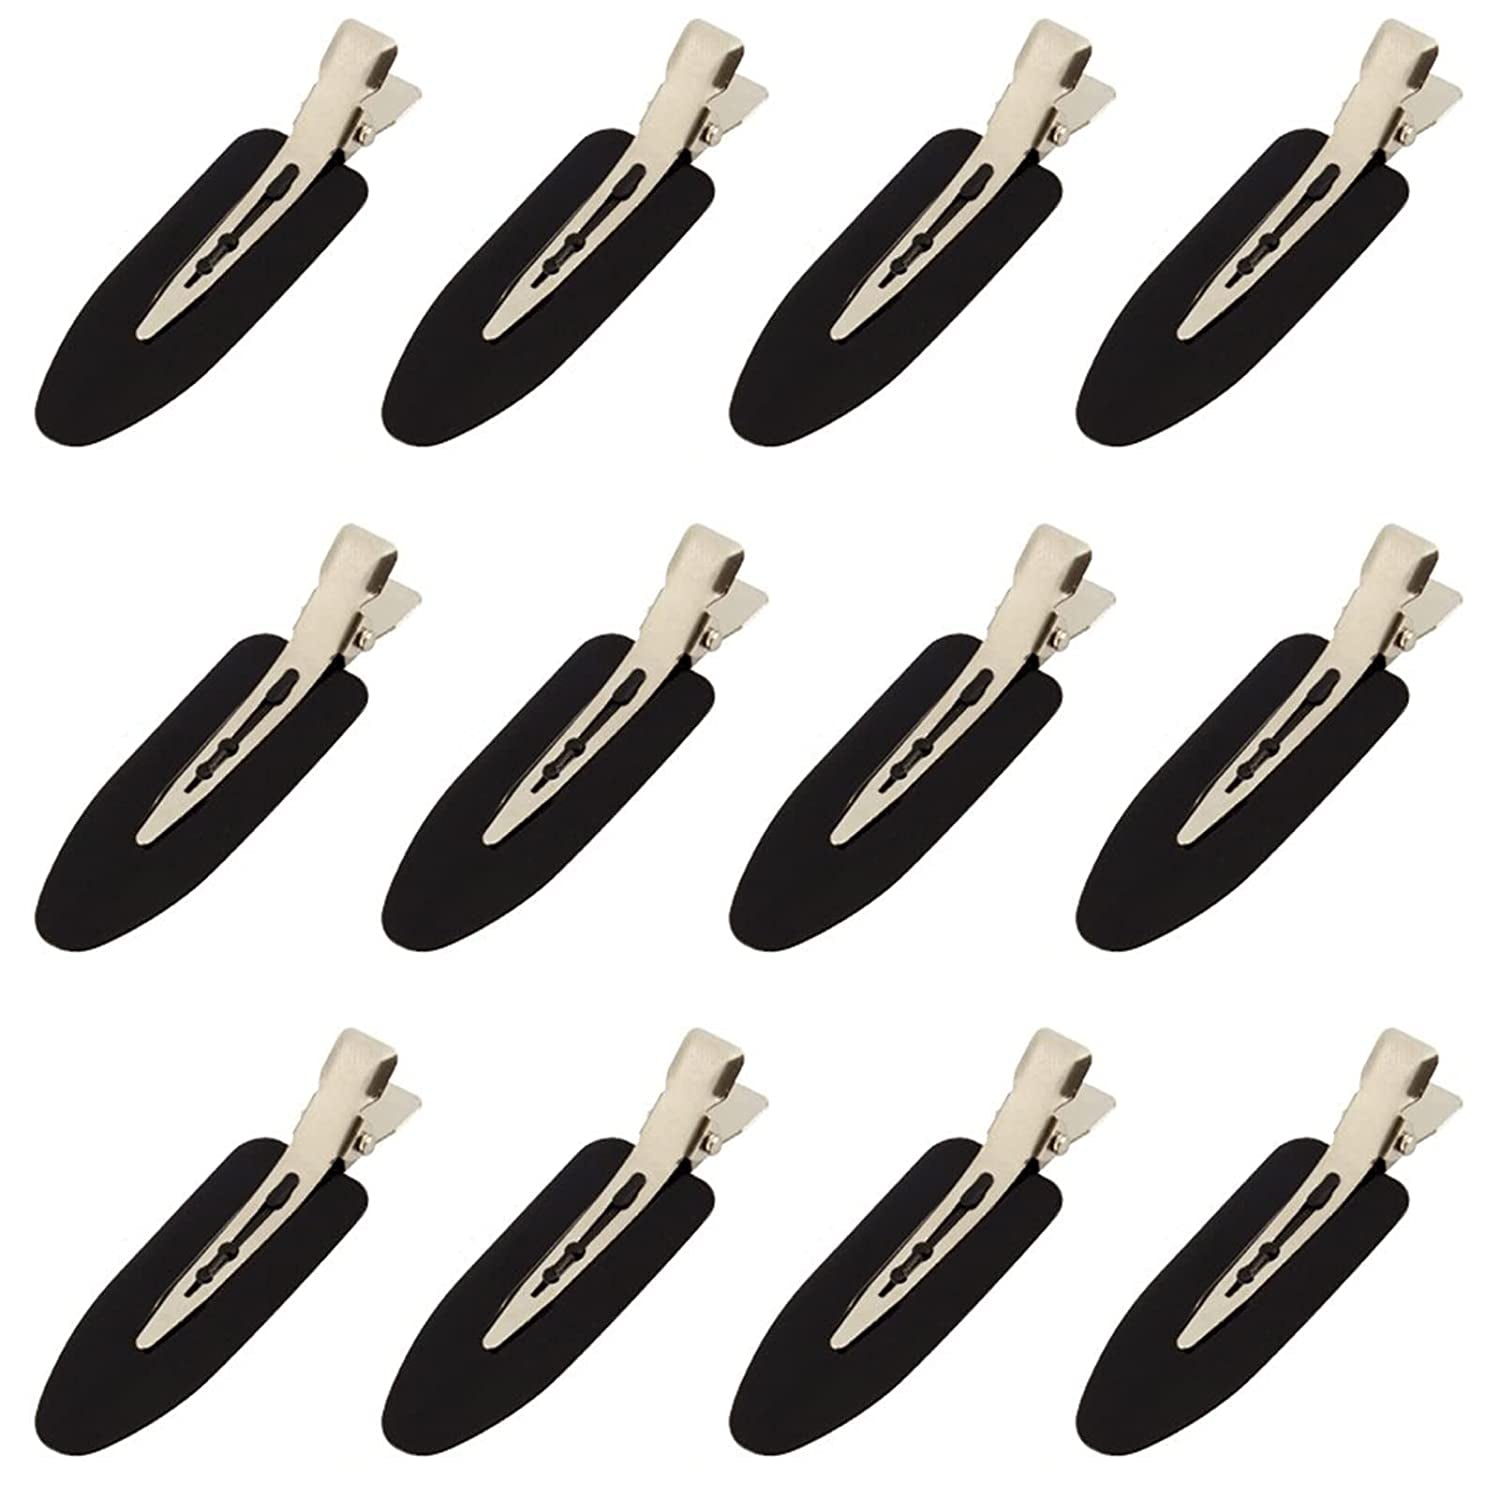 8 Pieces No bend / No Crease Hair Clips Styling Duck Bill Clips No Dent Alligator Hair Barrettes for Salon Hairstyle Hairdressing Bangs Waves Woman Girl Makeup Application